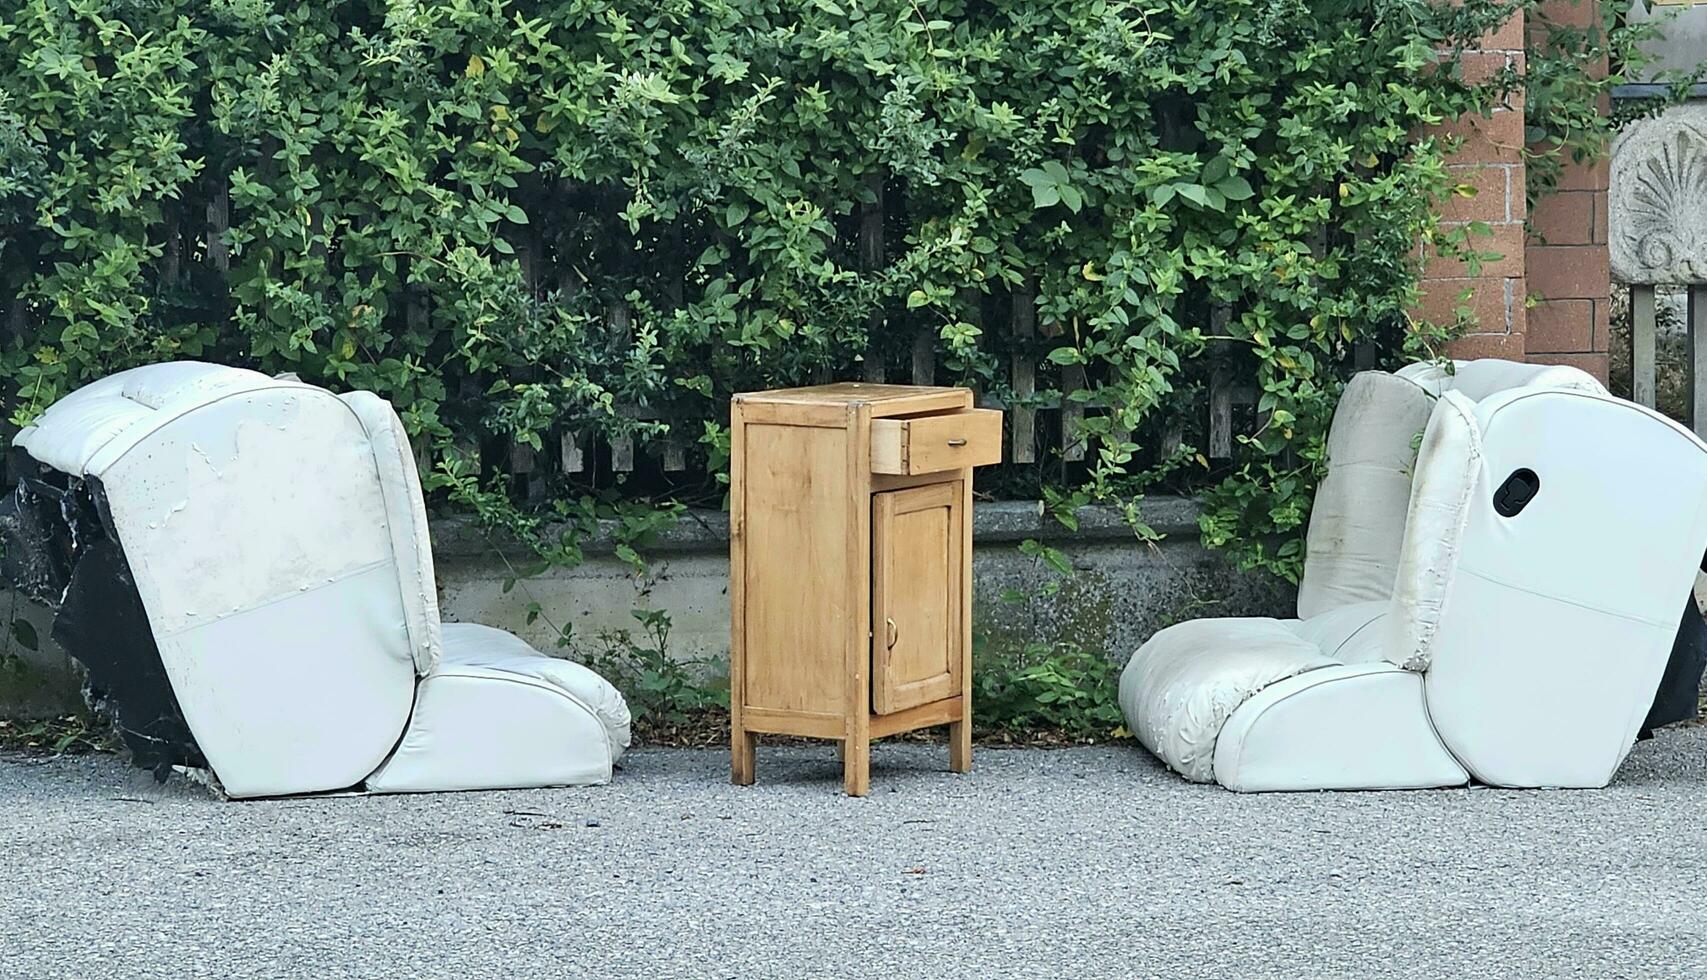 old furniture waiting to be taken away like rubbish in the landfill, in an Italian municipality in the summer of 2023 photo